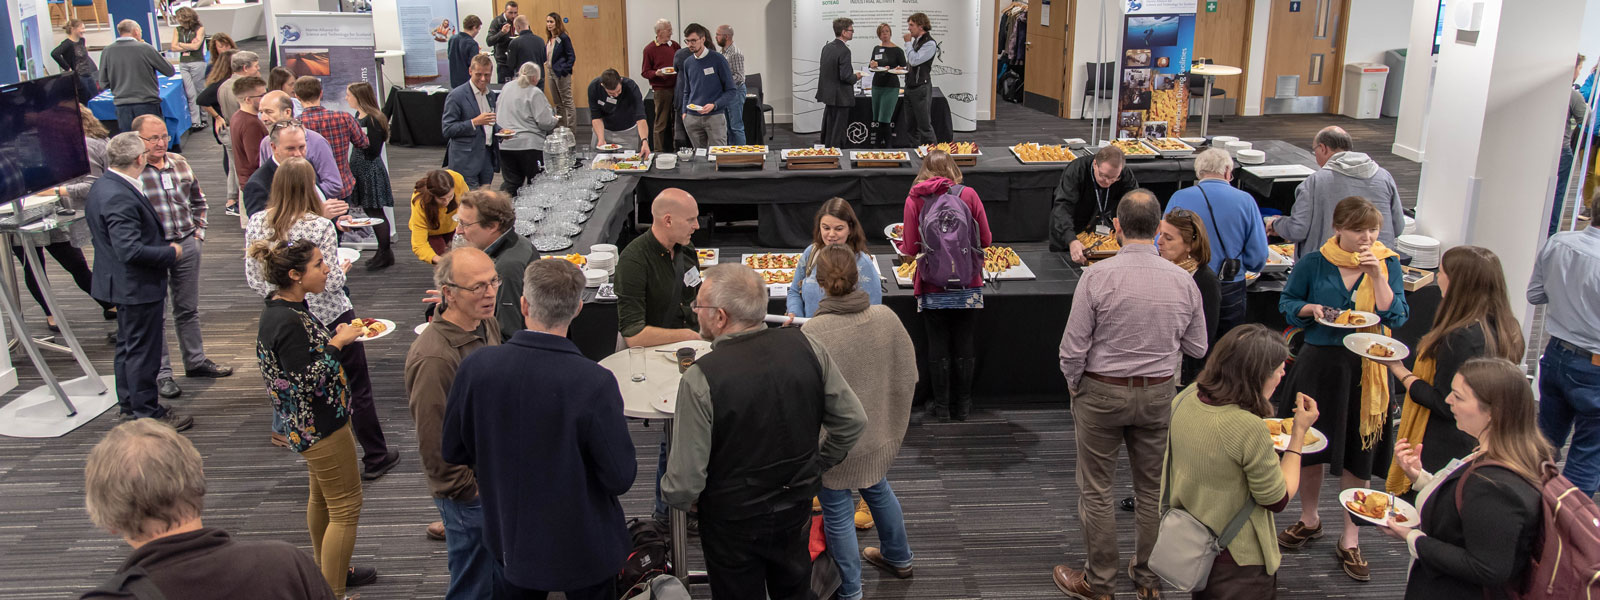 Delegates helping themselves to a buffet in Level 2 Foyer of the Technology and Innovation Centre.  Photo: Lucy Knott